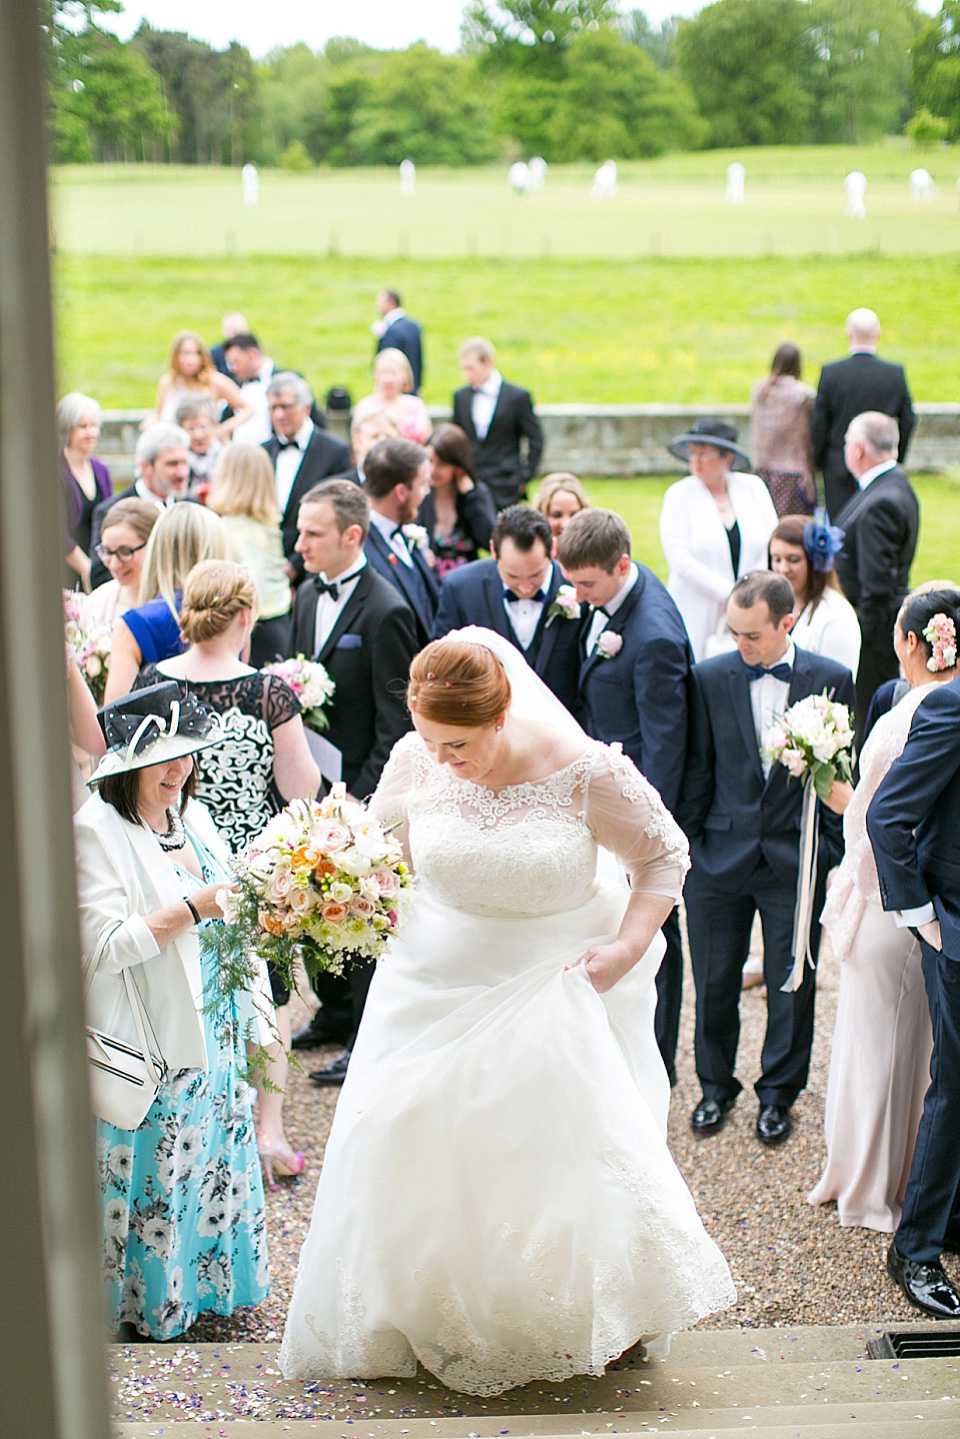 A Charlotte Balbier Gown for an Elegant Black Tie Wedding at Iscoyd Park. Photography by Anneli Marinovich.